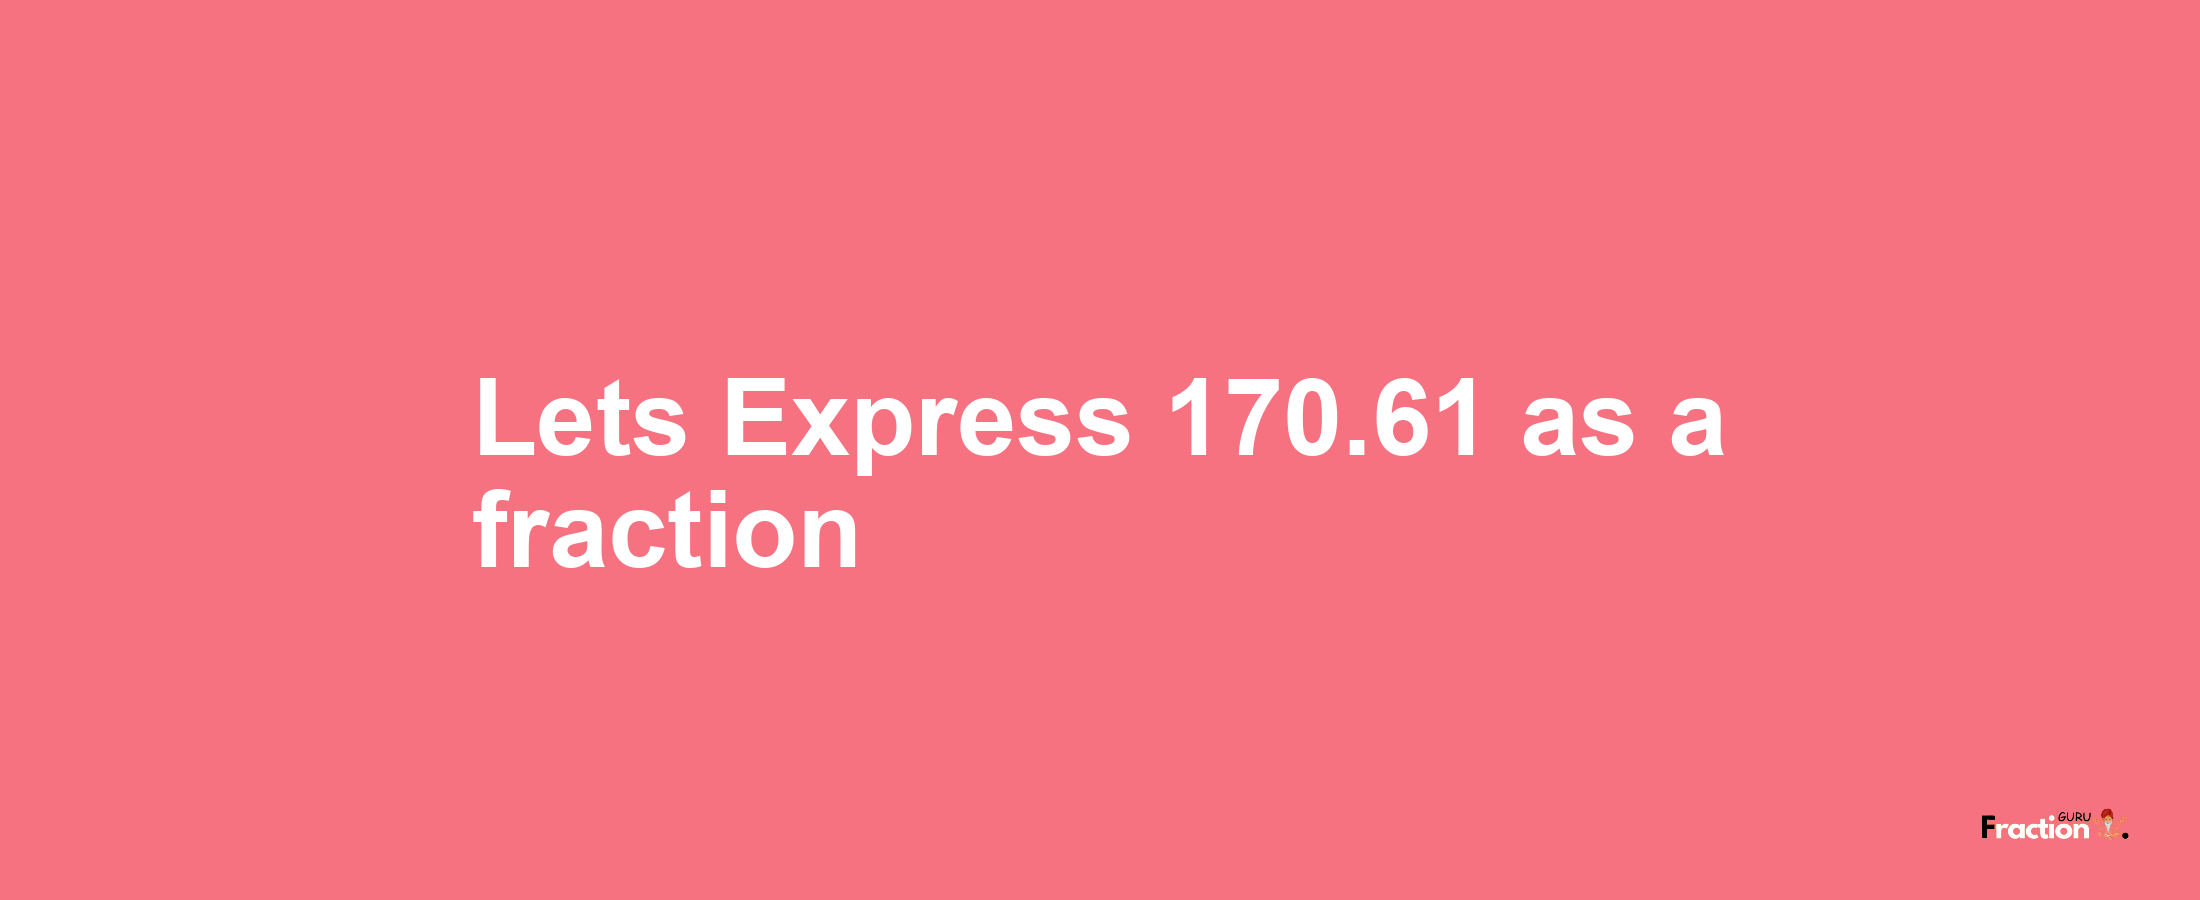 Lets Express 170.61 as afraction